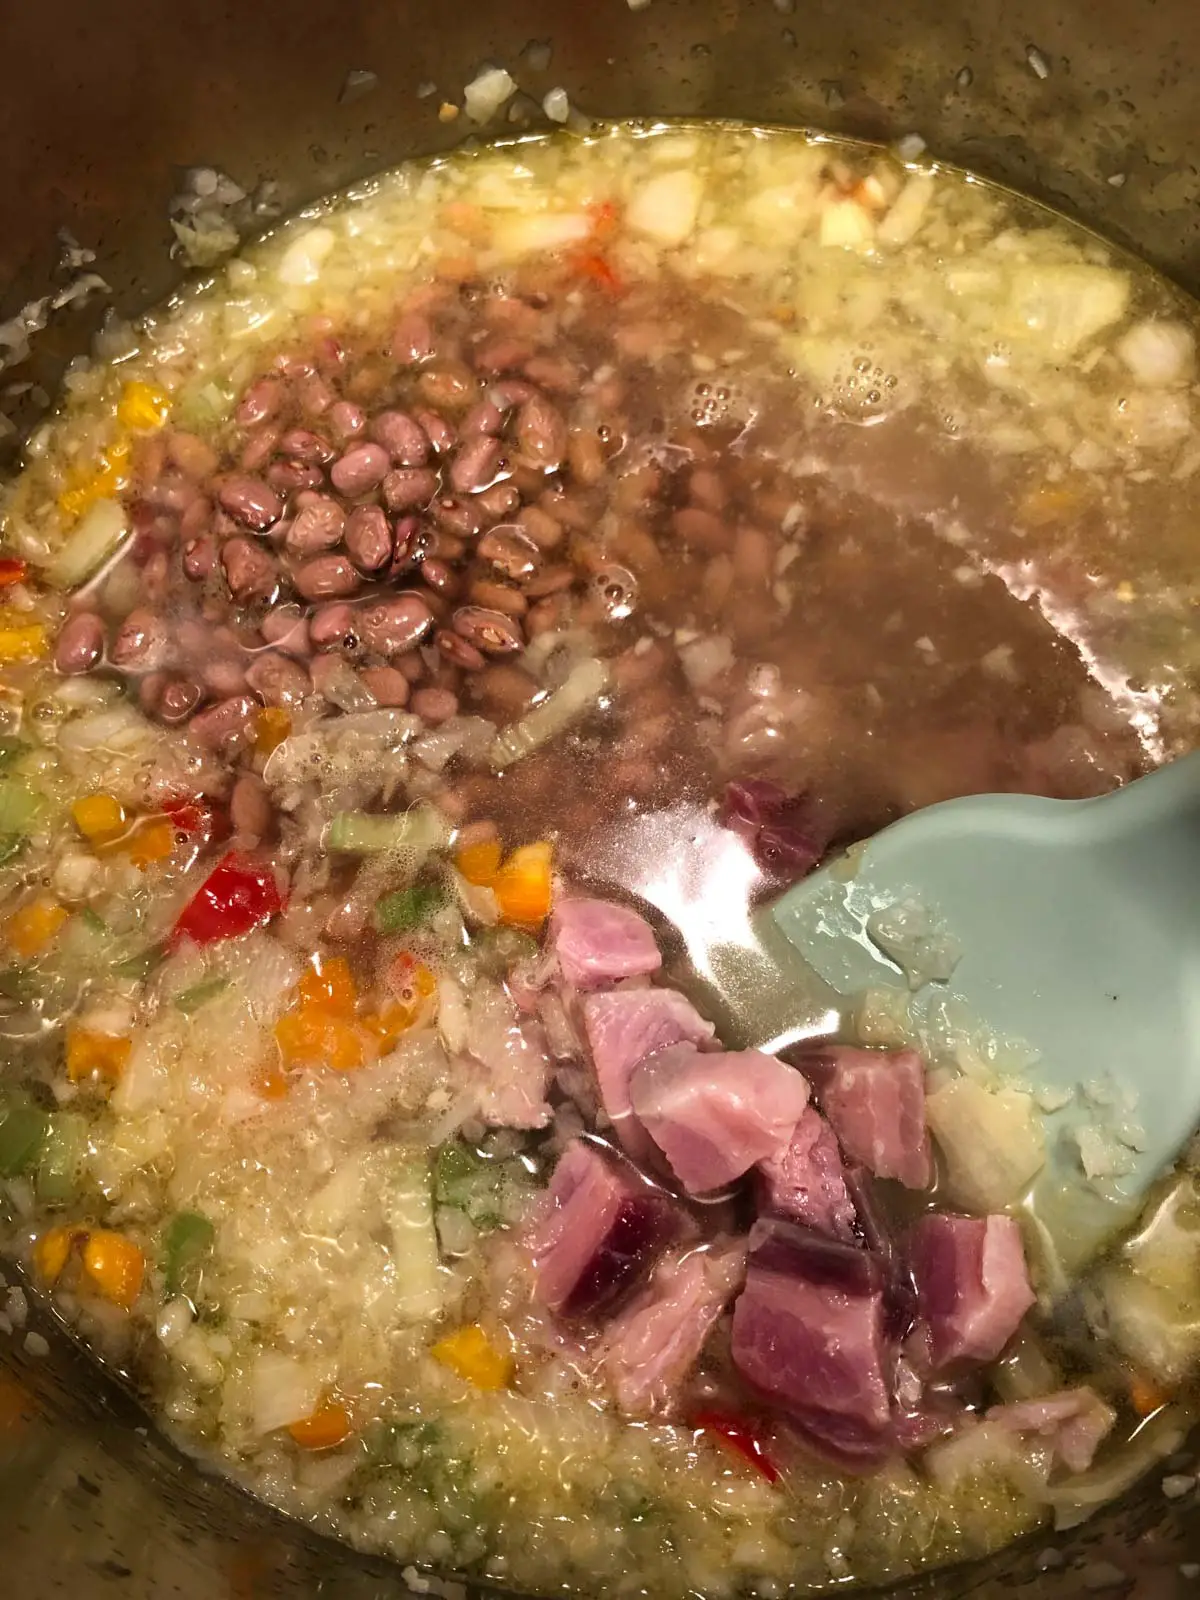 Pink beans, diced and minced vegetables including onions and sweet bell peppers, and diced salt pork in broth in a large pot with a blue utensil.